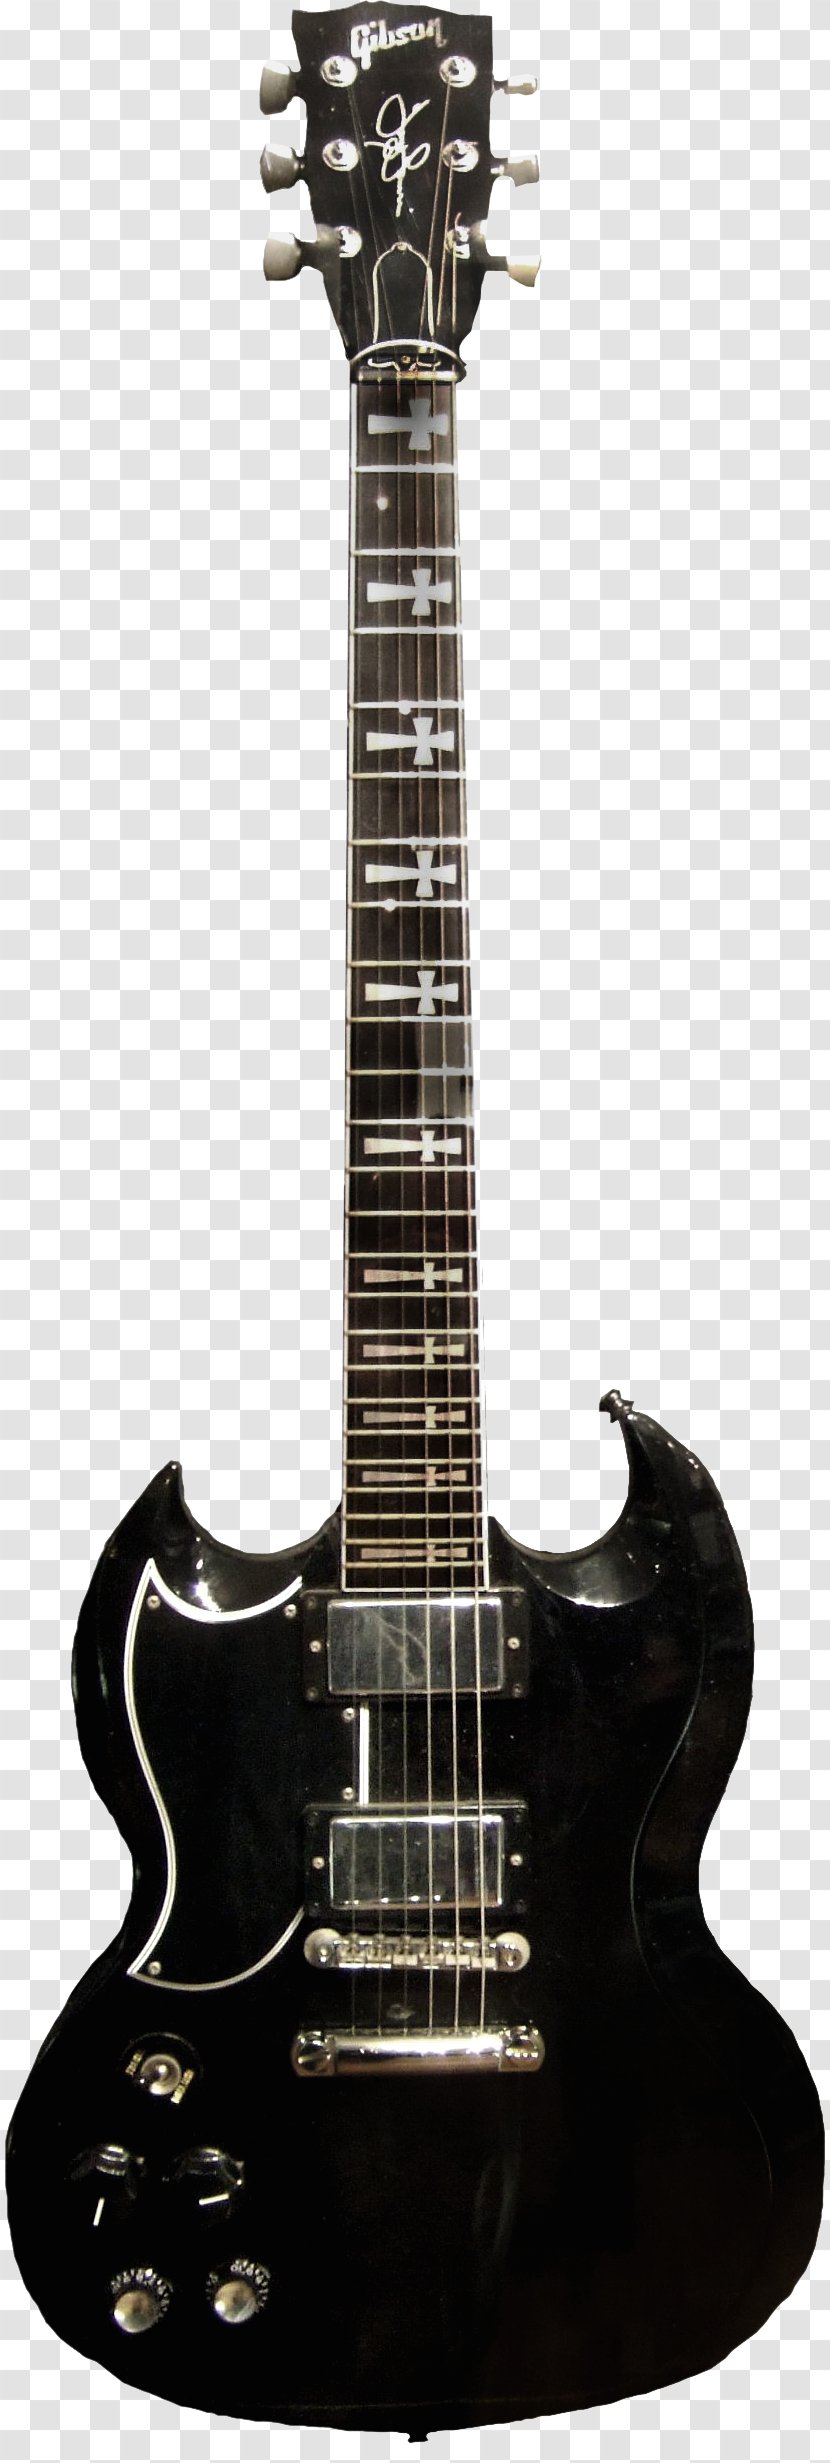 Gibson SG Special Les Paul Custom Guitar Brands, Inc. - Electronic Musical Instrument Transparent PNG